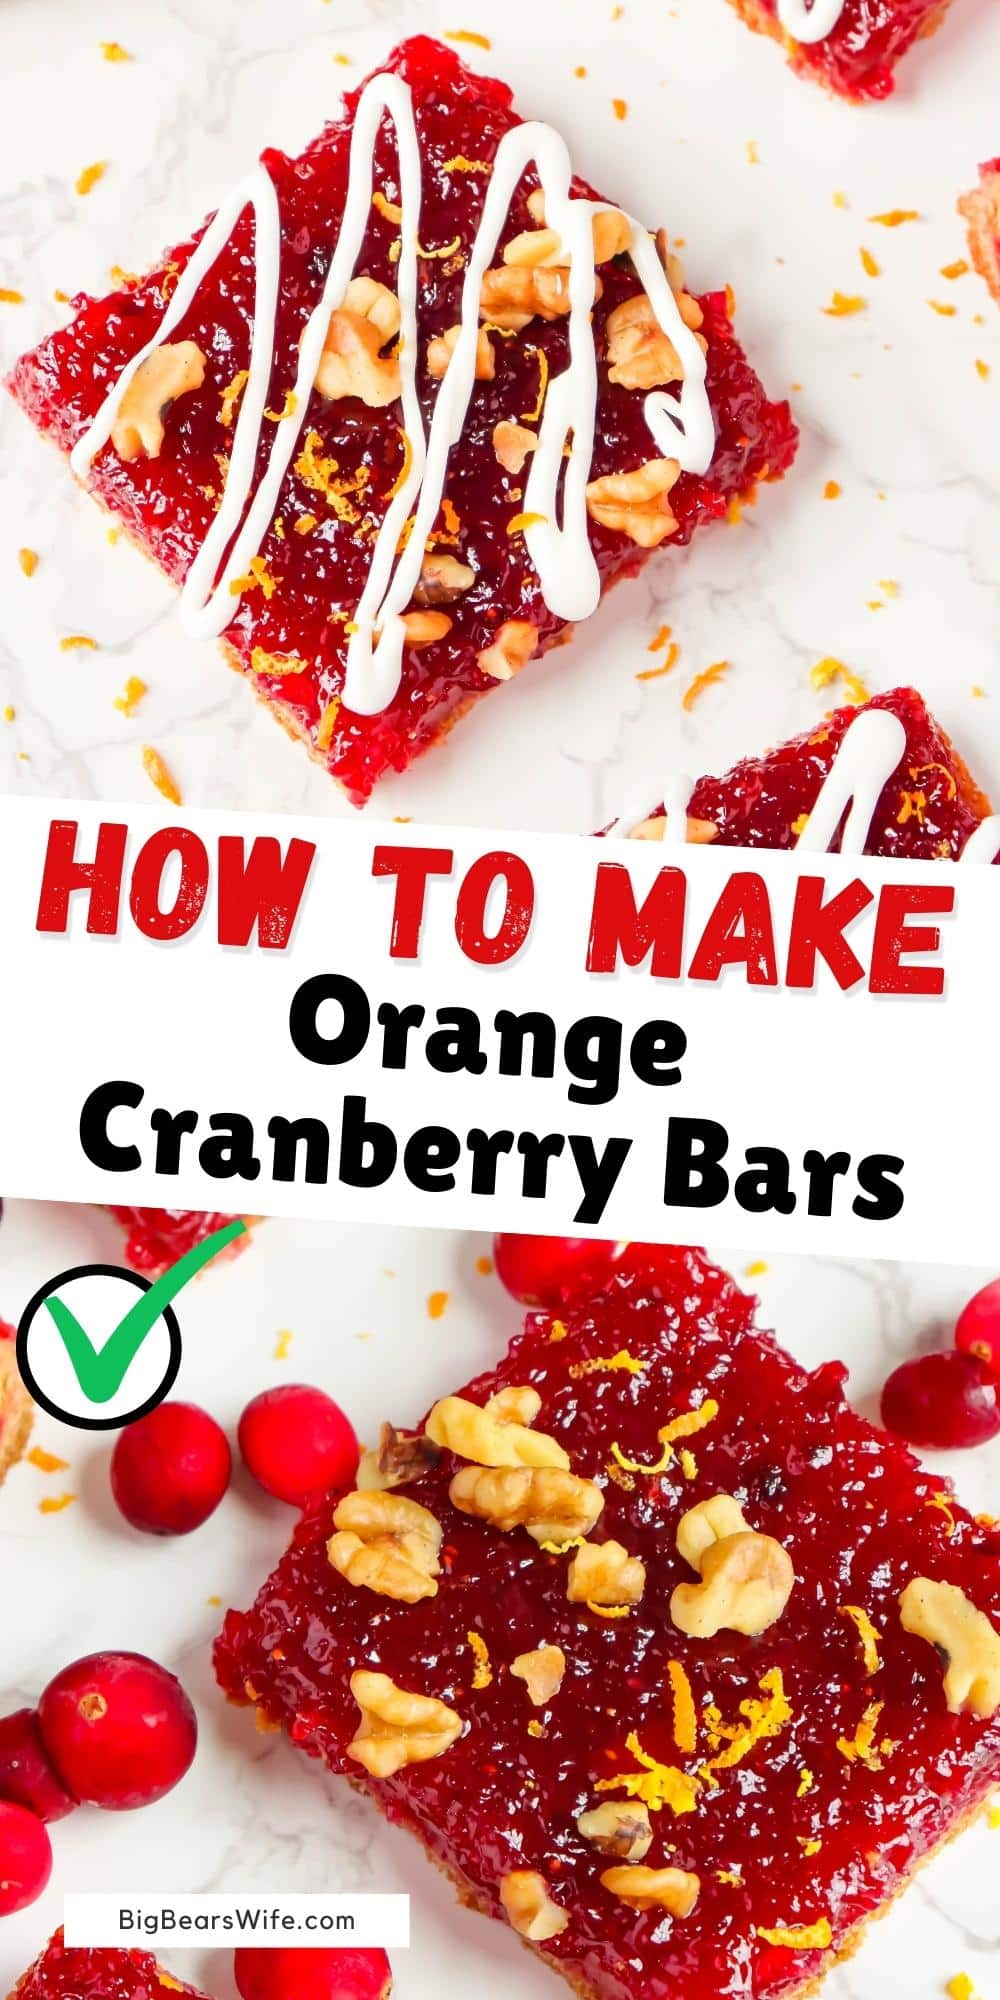 These tart Cranberry Orange Bars are perfect for the holidays! Made with fresh cranberries and oranges over a vanilla cookie crust. These bars are perfect when topped with walnuts, orange zest and a vanilla icing drizzle.  via @bigbearswife